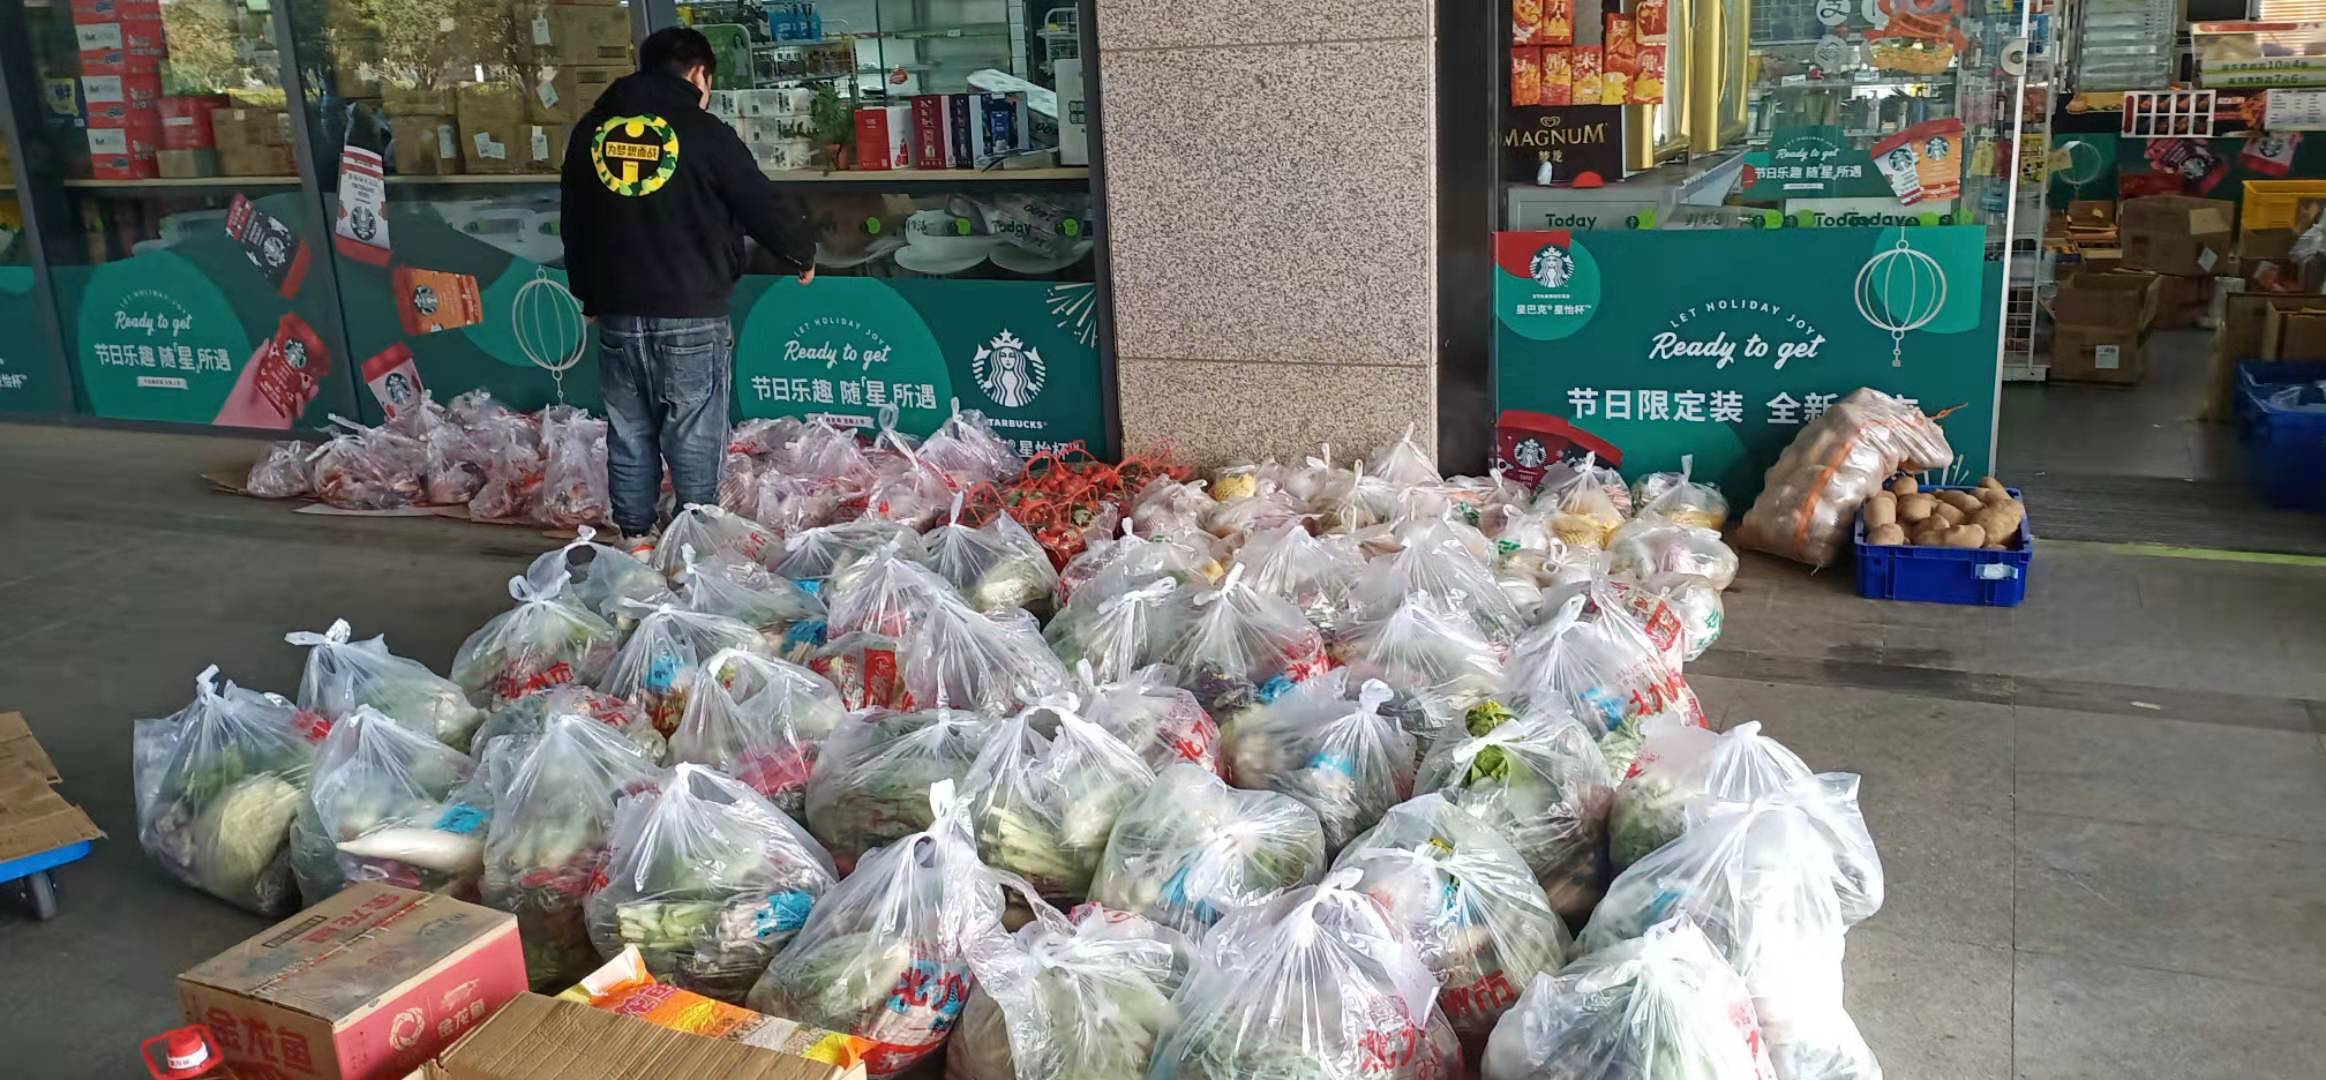 JD’s community group buying business, Friends Shop, has been delivering fresh meat, fruits, and vegetables to the people of Wuhan